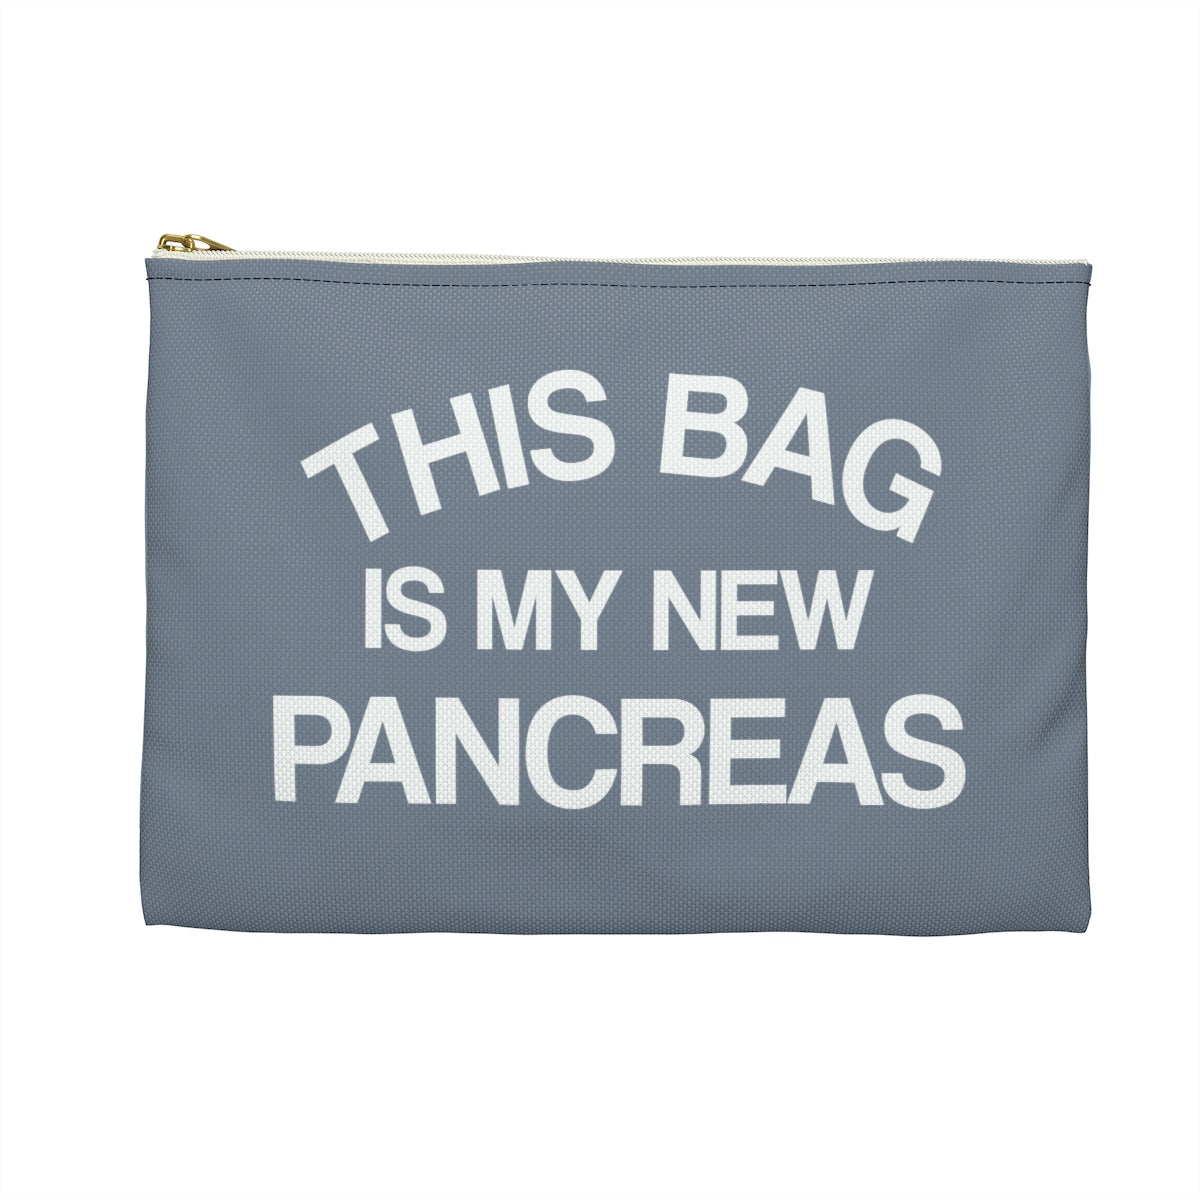 Diabetes Supply Bag, This Bag is my New Pancreas, Fun Diabetic Travel Case, Cute Funny Gift, Type 1 One, Accessory Flat Zipper Pouch Starcove Fashion